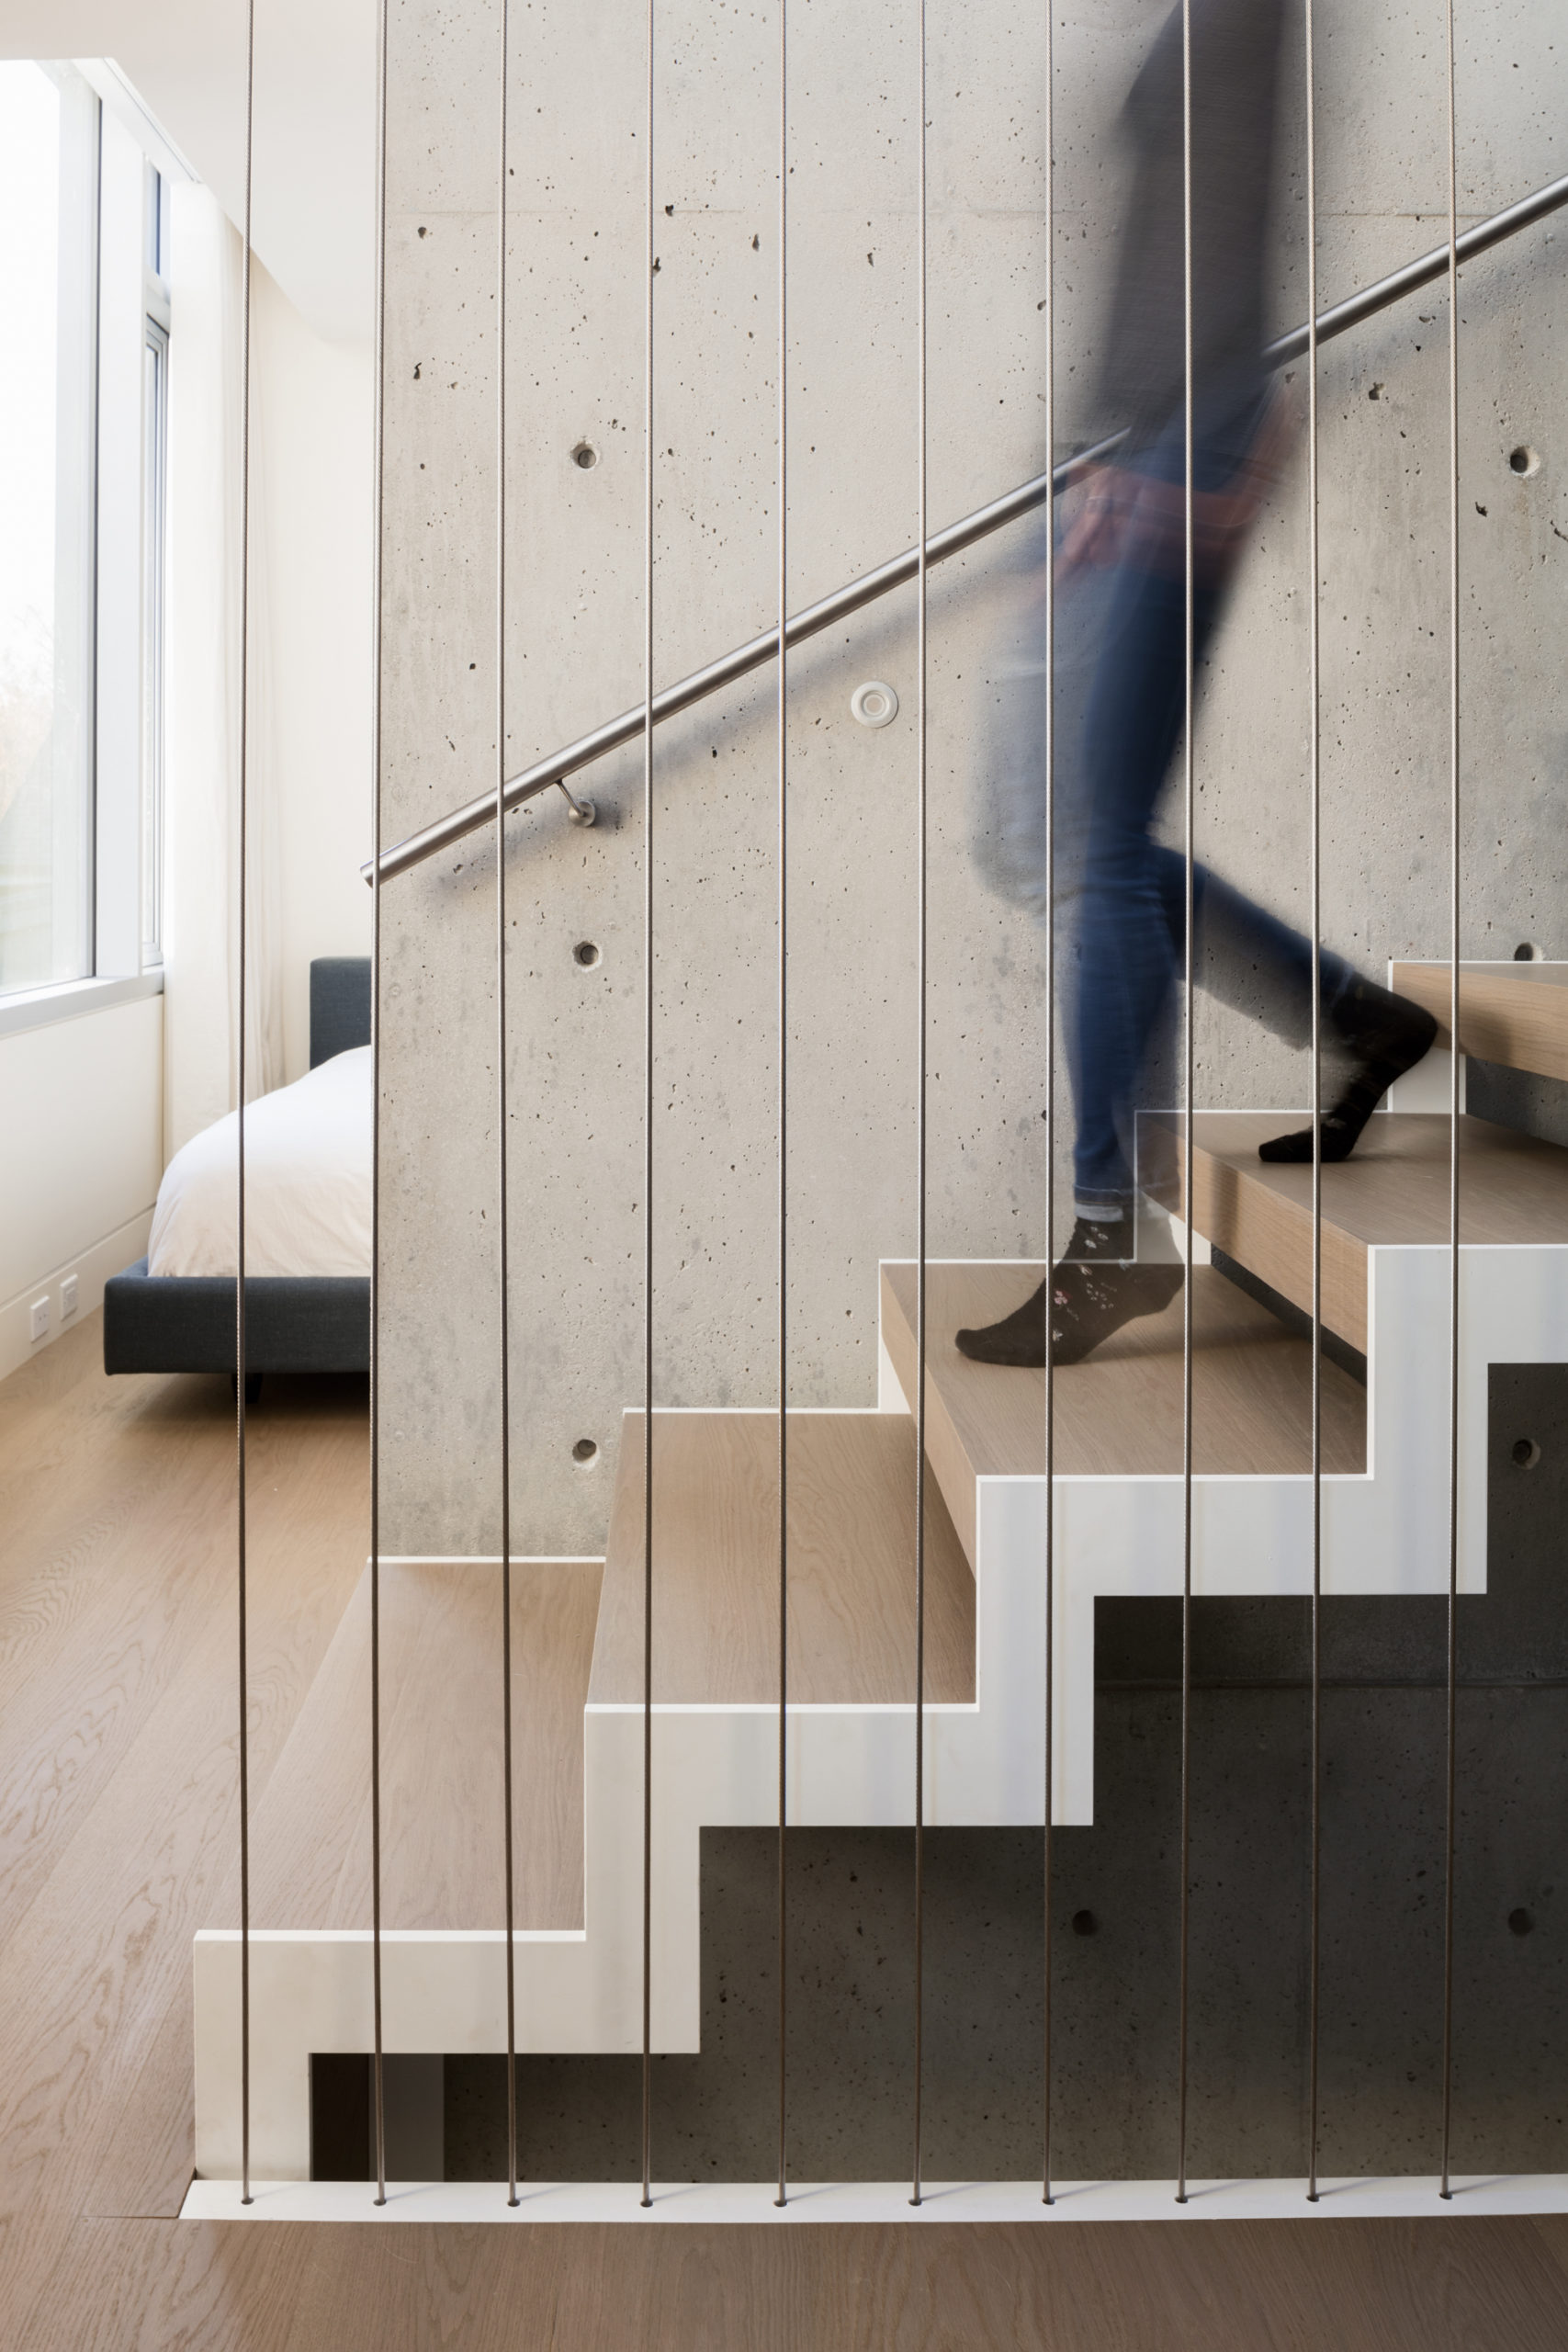 Contemporary stairs with a minimalist design at a custom home in Vancouver.